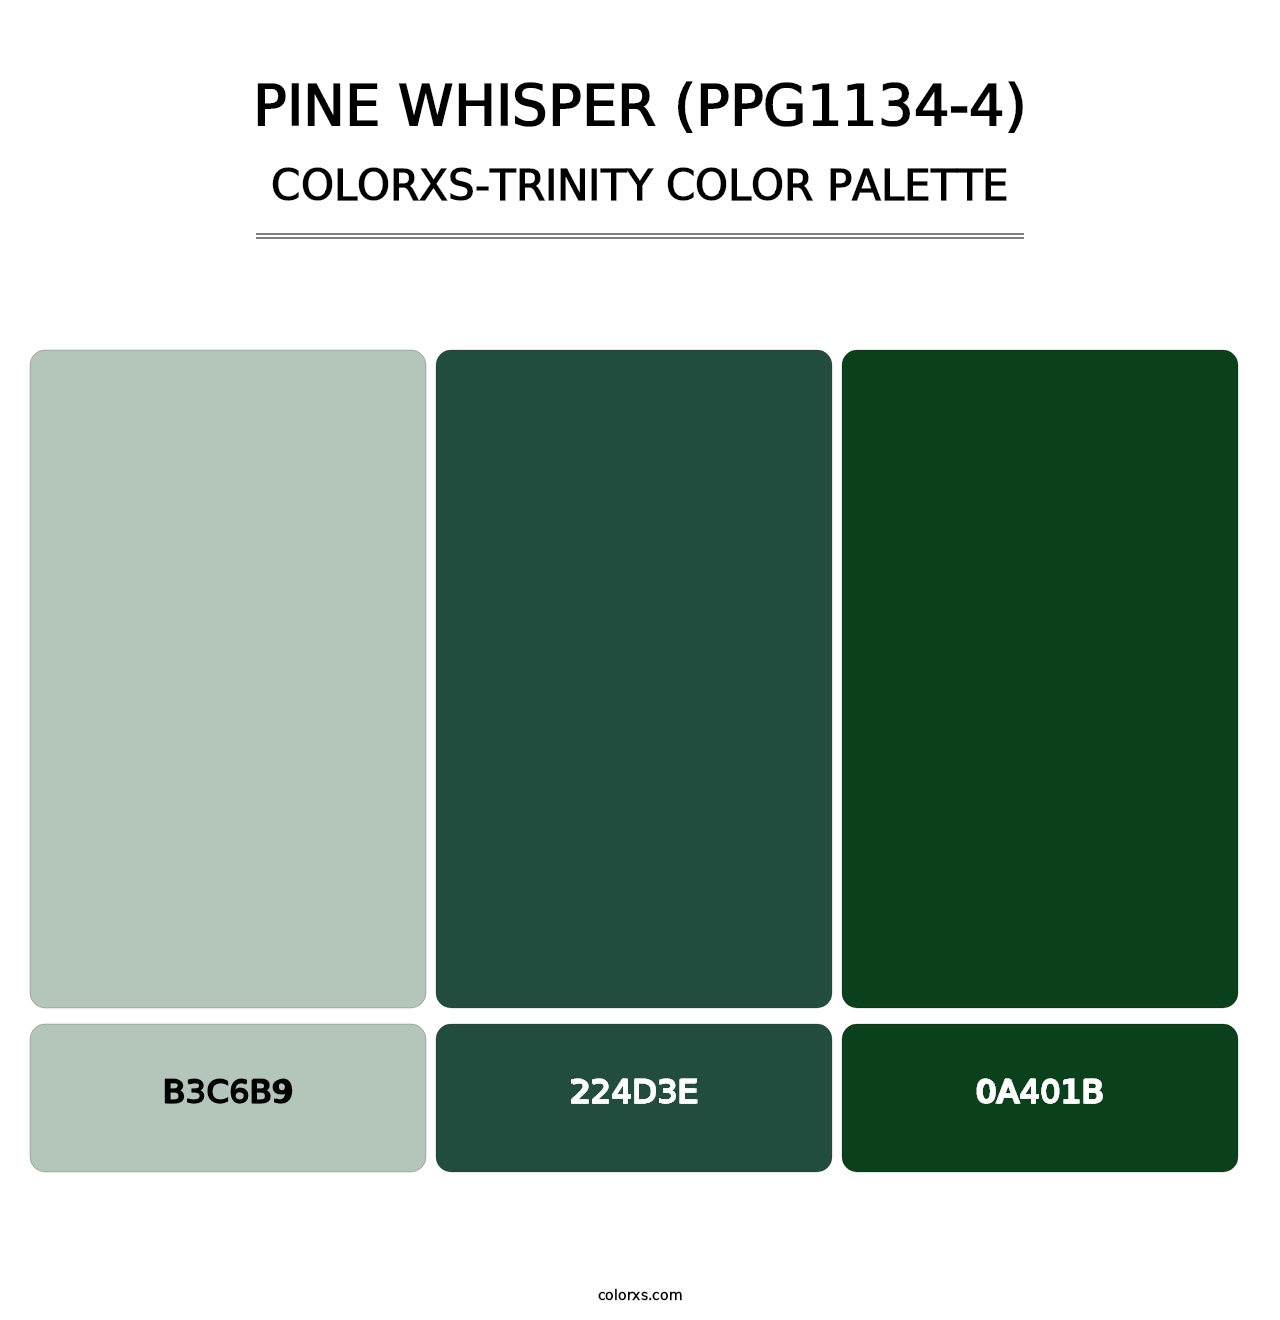 Pine Whisper (PPG1134-4) - Colorxs Trinity Palette